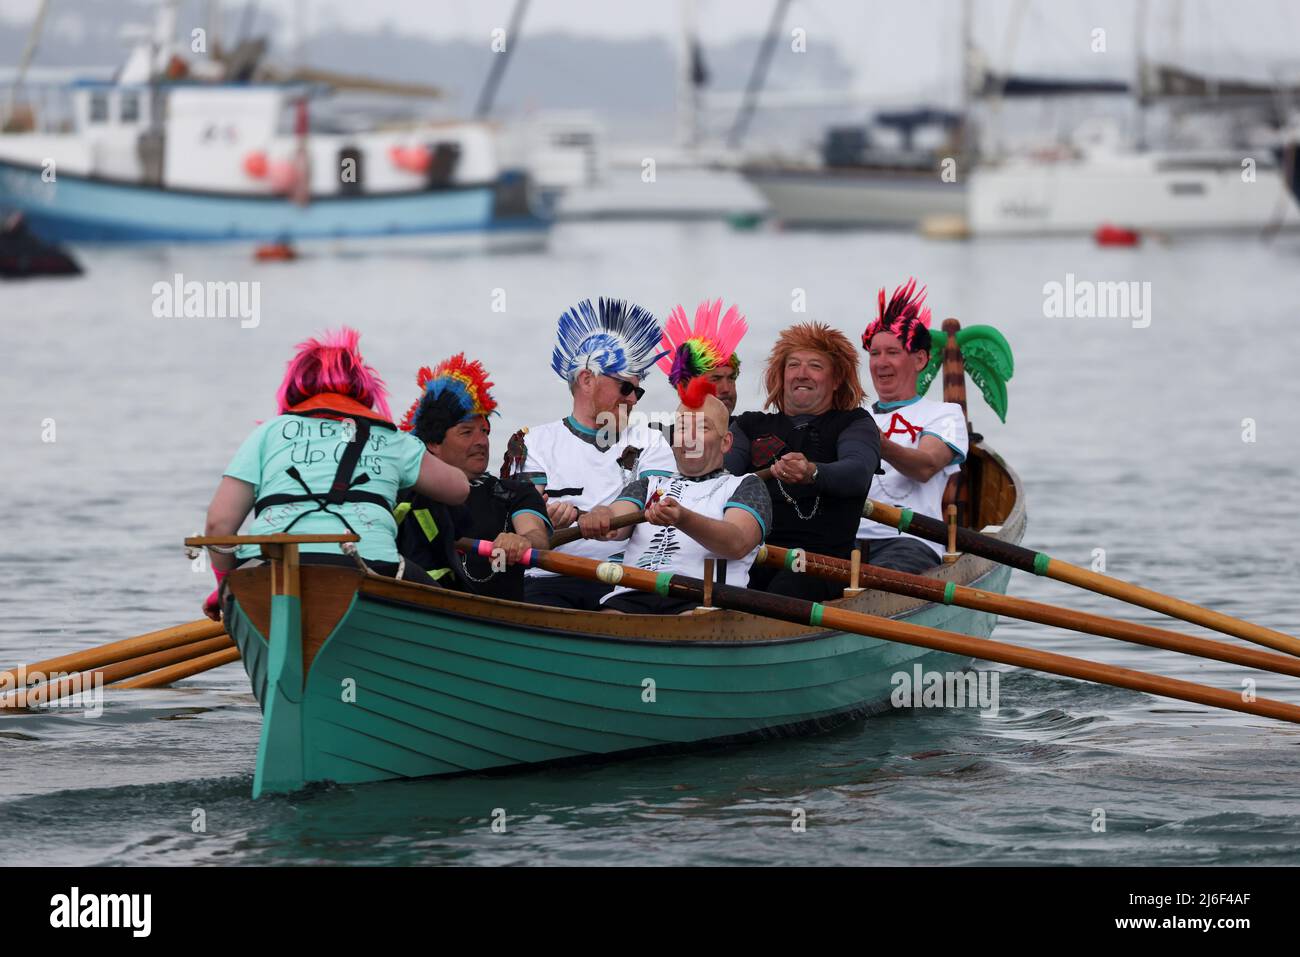 Rowers compete during the World Pilot Gig rowing Championships from Nut Rock to St. Mary's, in the Isles of Scilly, Britain, May 1, 2022. REUTERS/Tom Nicholson Stock Photo